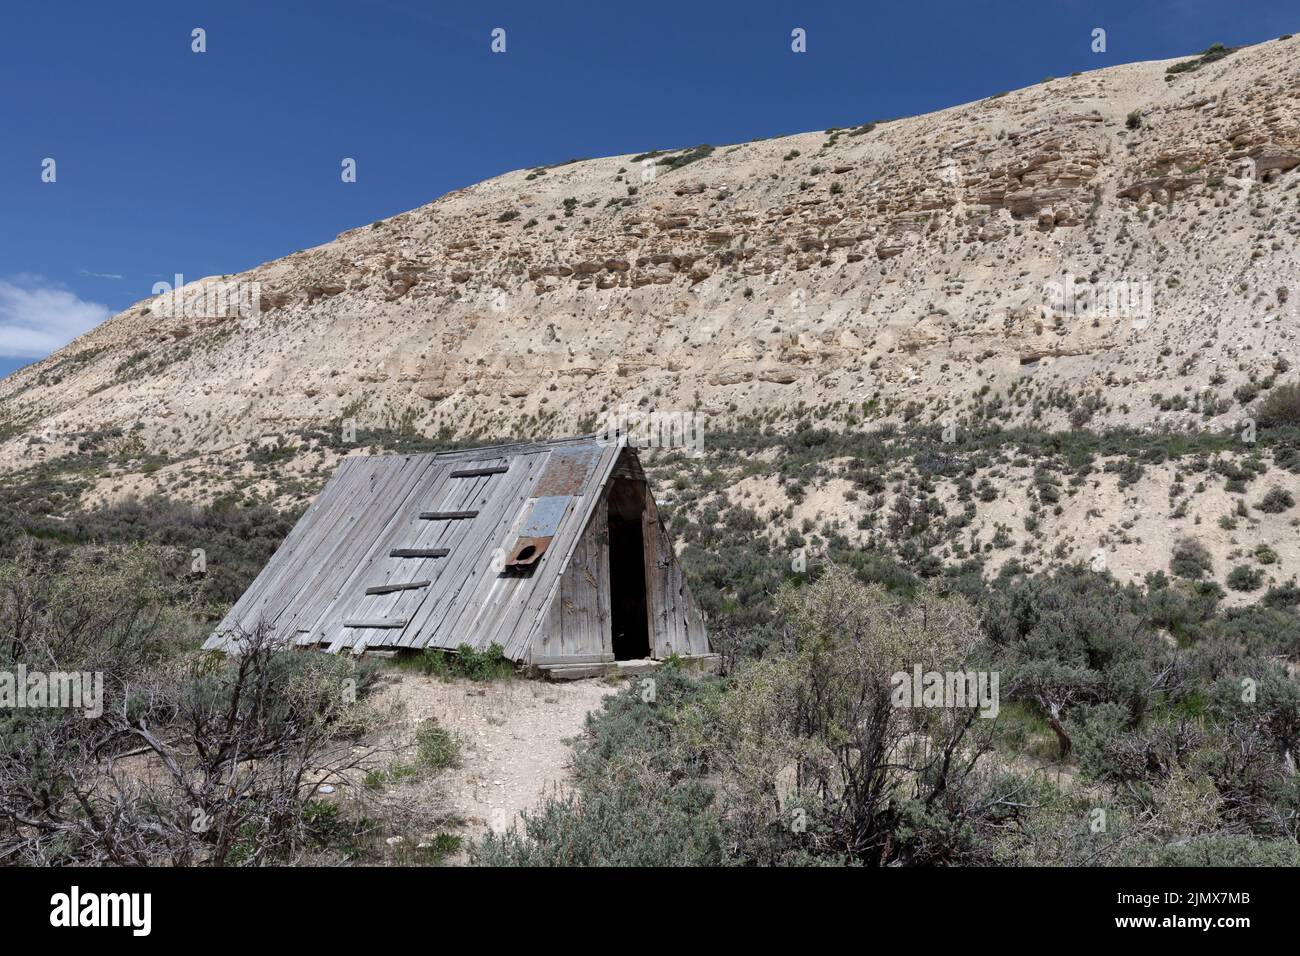 Shack used by fossil hunter David Haddenham until his death in 1968 while hunnting fossils in what is now Fossil Butte National Monument in Wyoming. Stock Photo